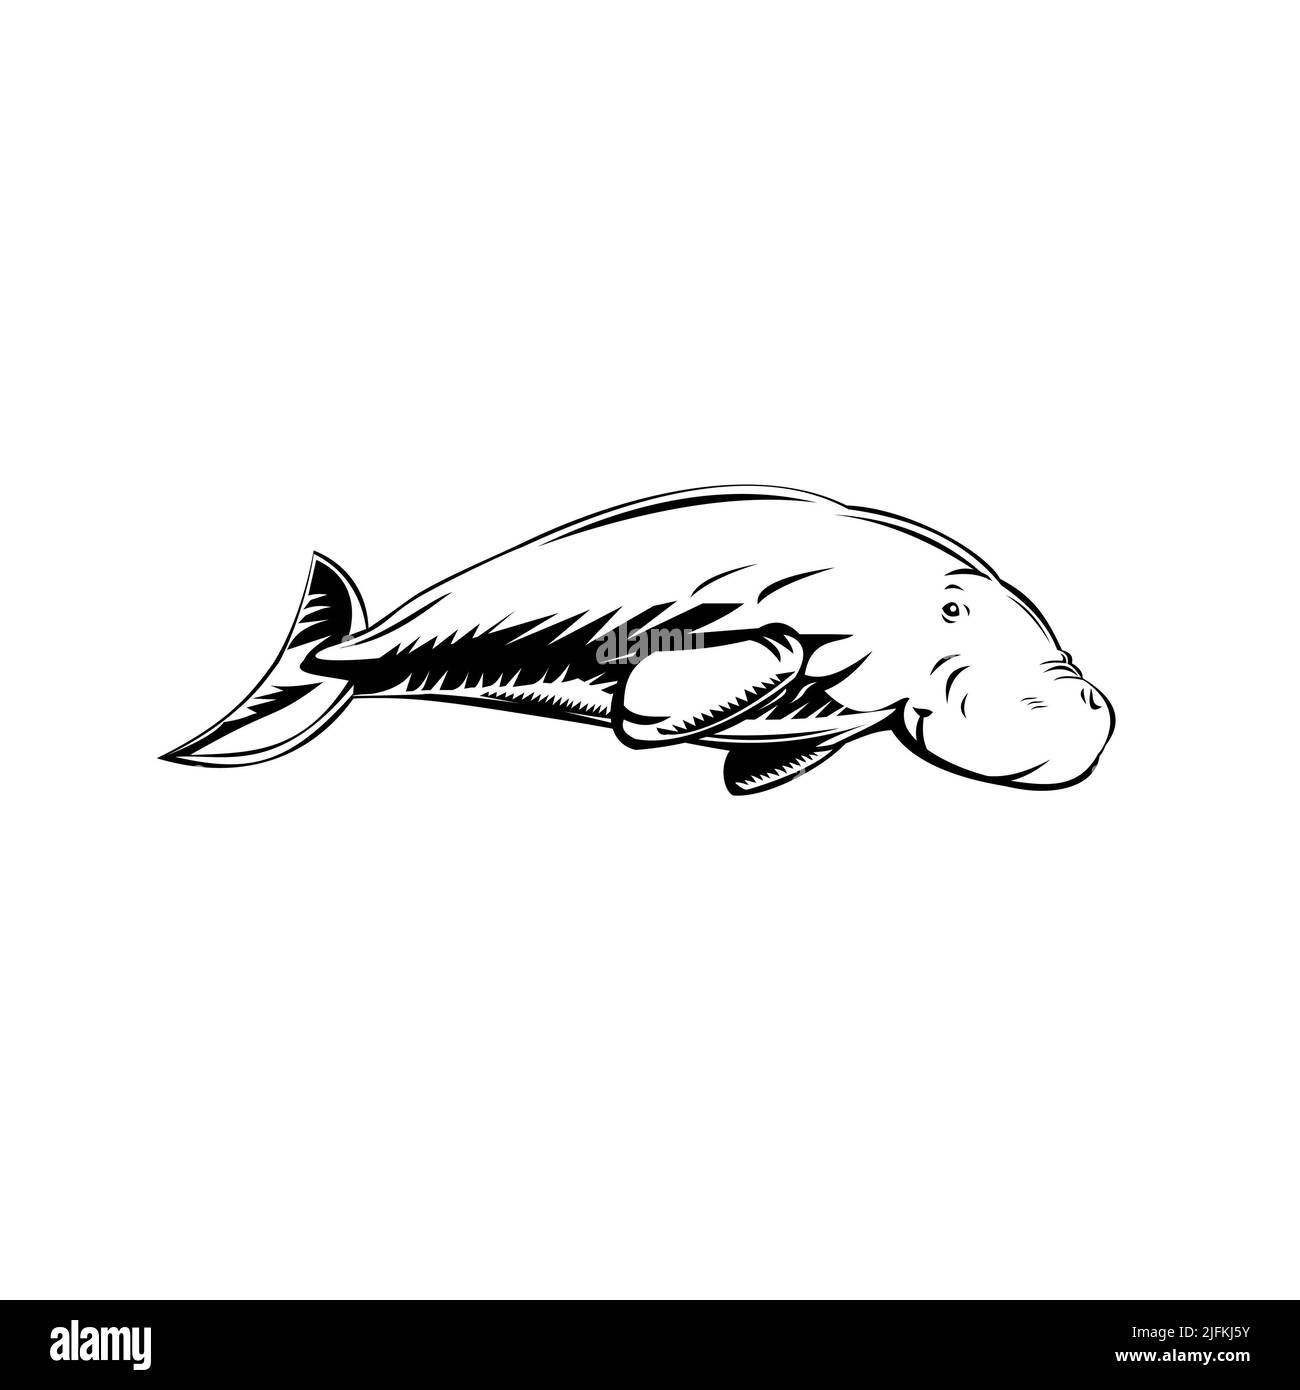 Retro woodcut style illustration of a dugong, a medium-sized marine mammal one of four living species of the order sirenia, viewed from side on Stock Photo